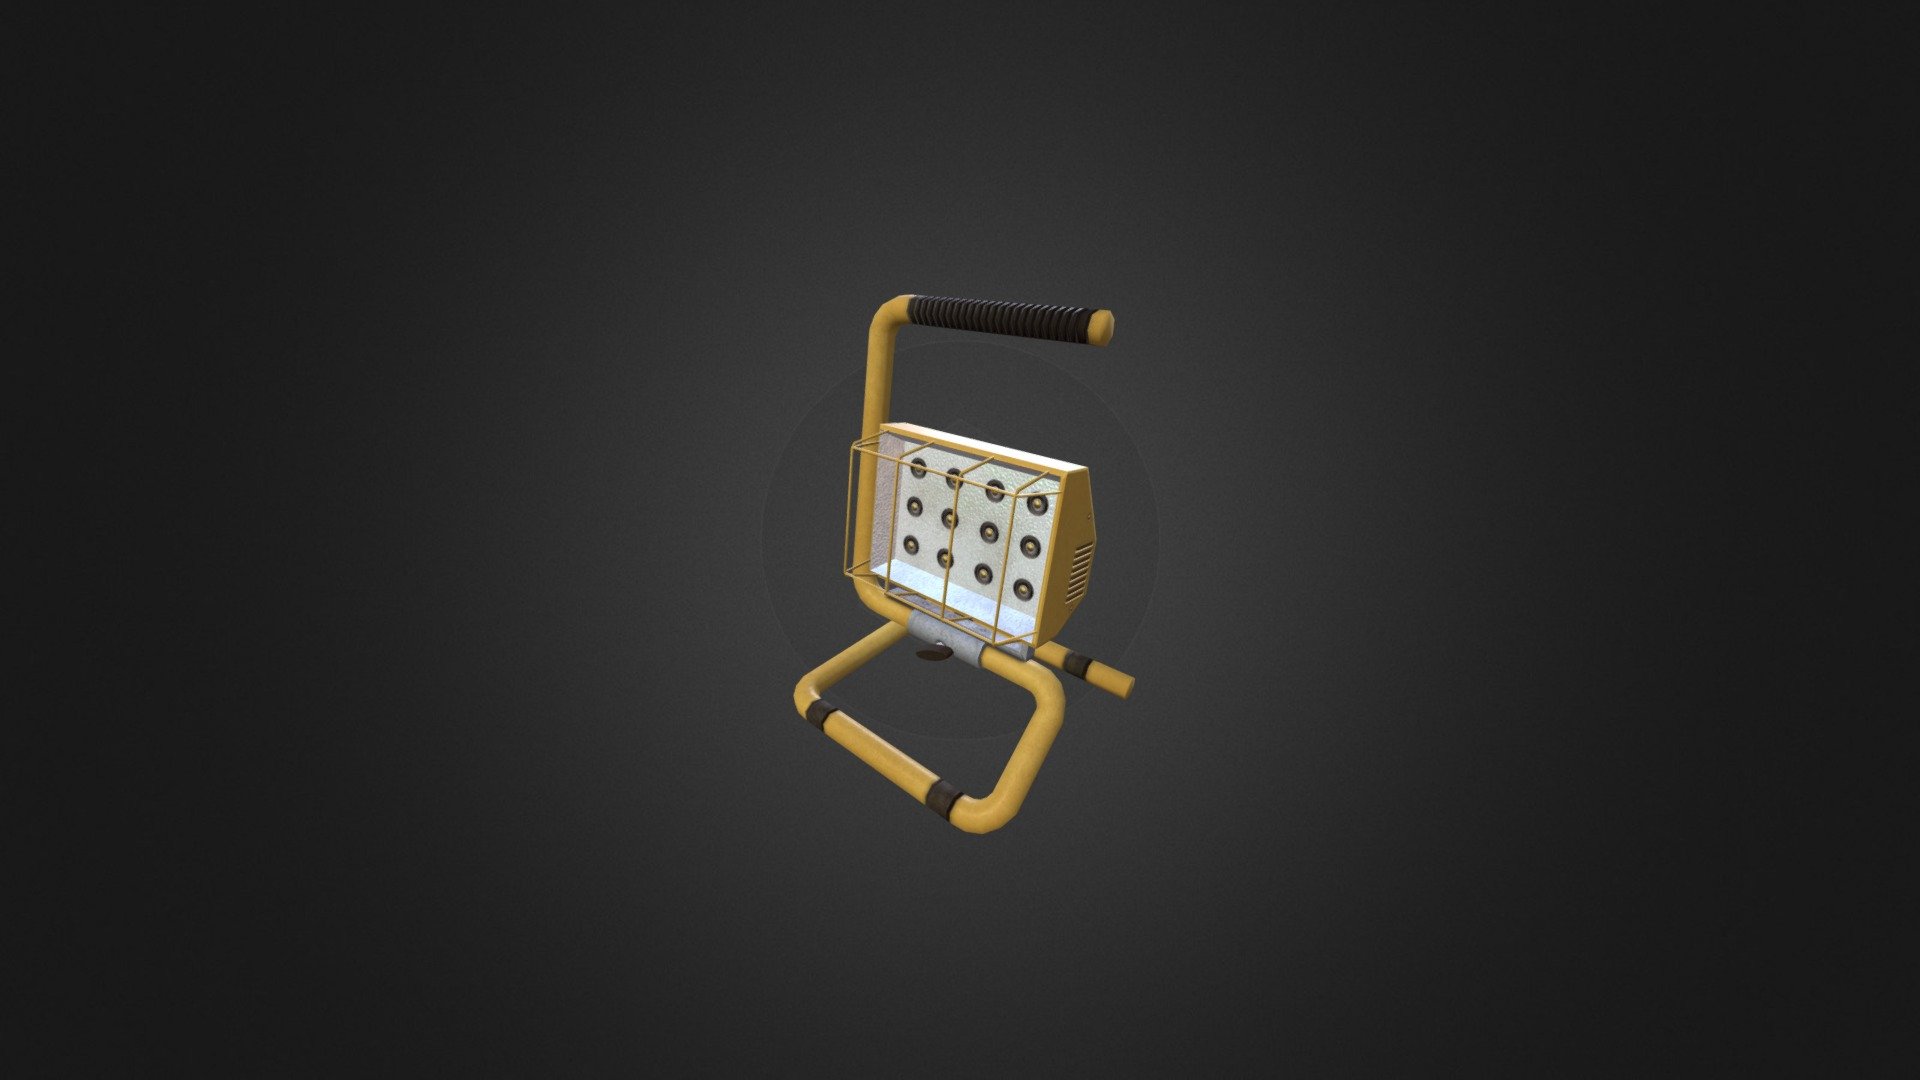 Asset for any genre of games. Model 798 tris. Used 1024x1024 PBR texture 3d model